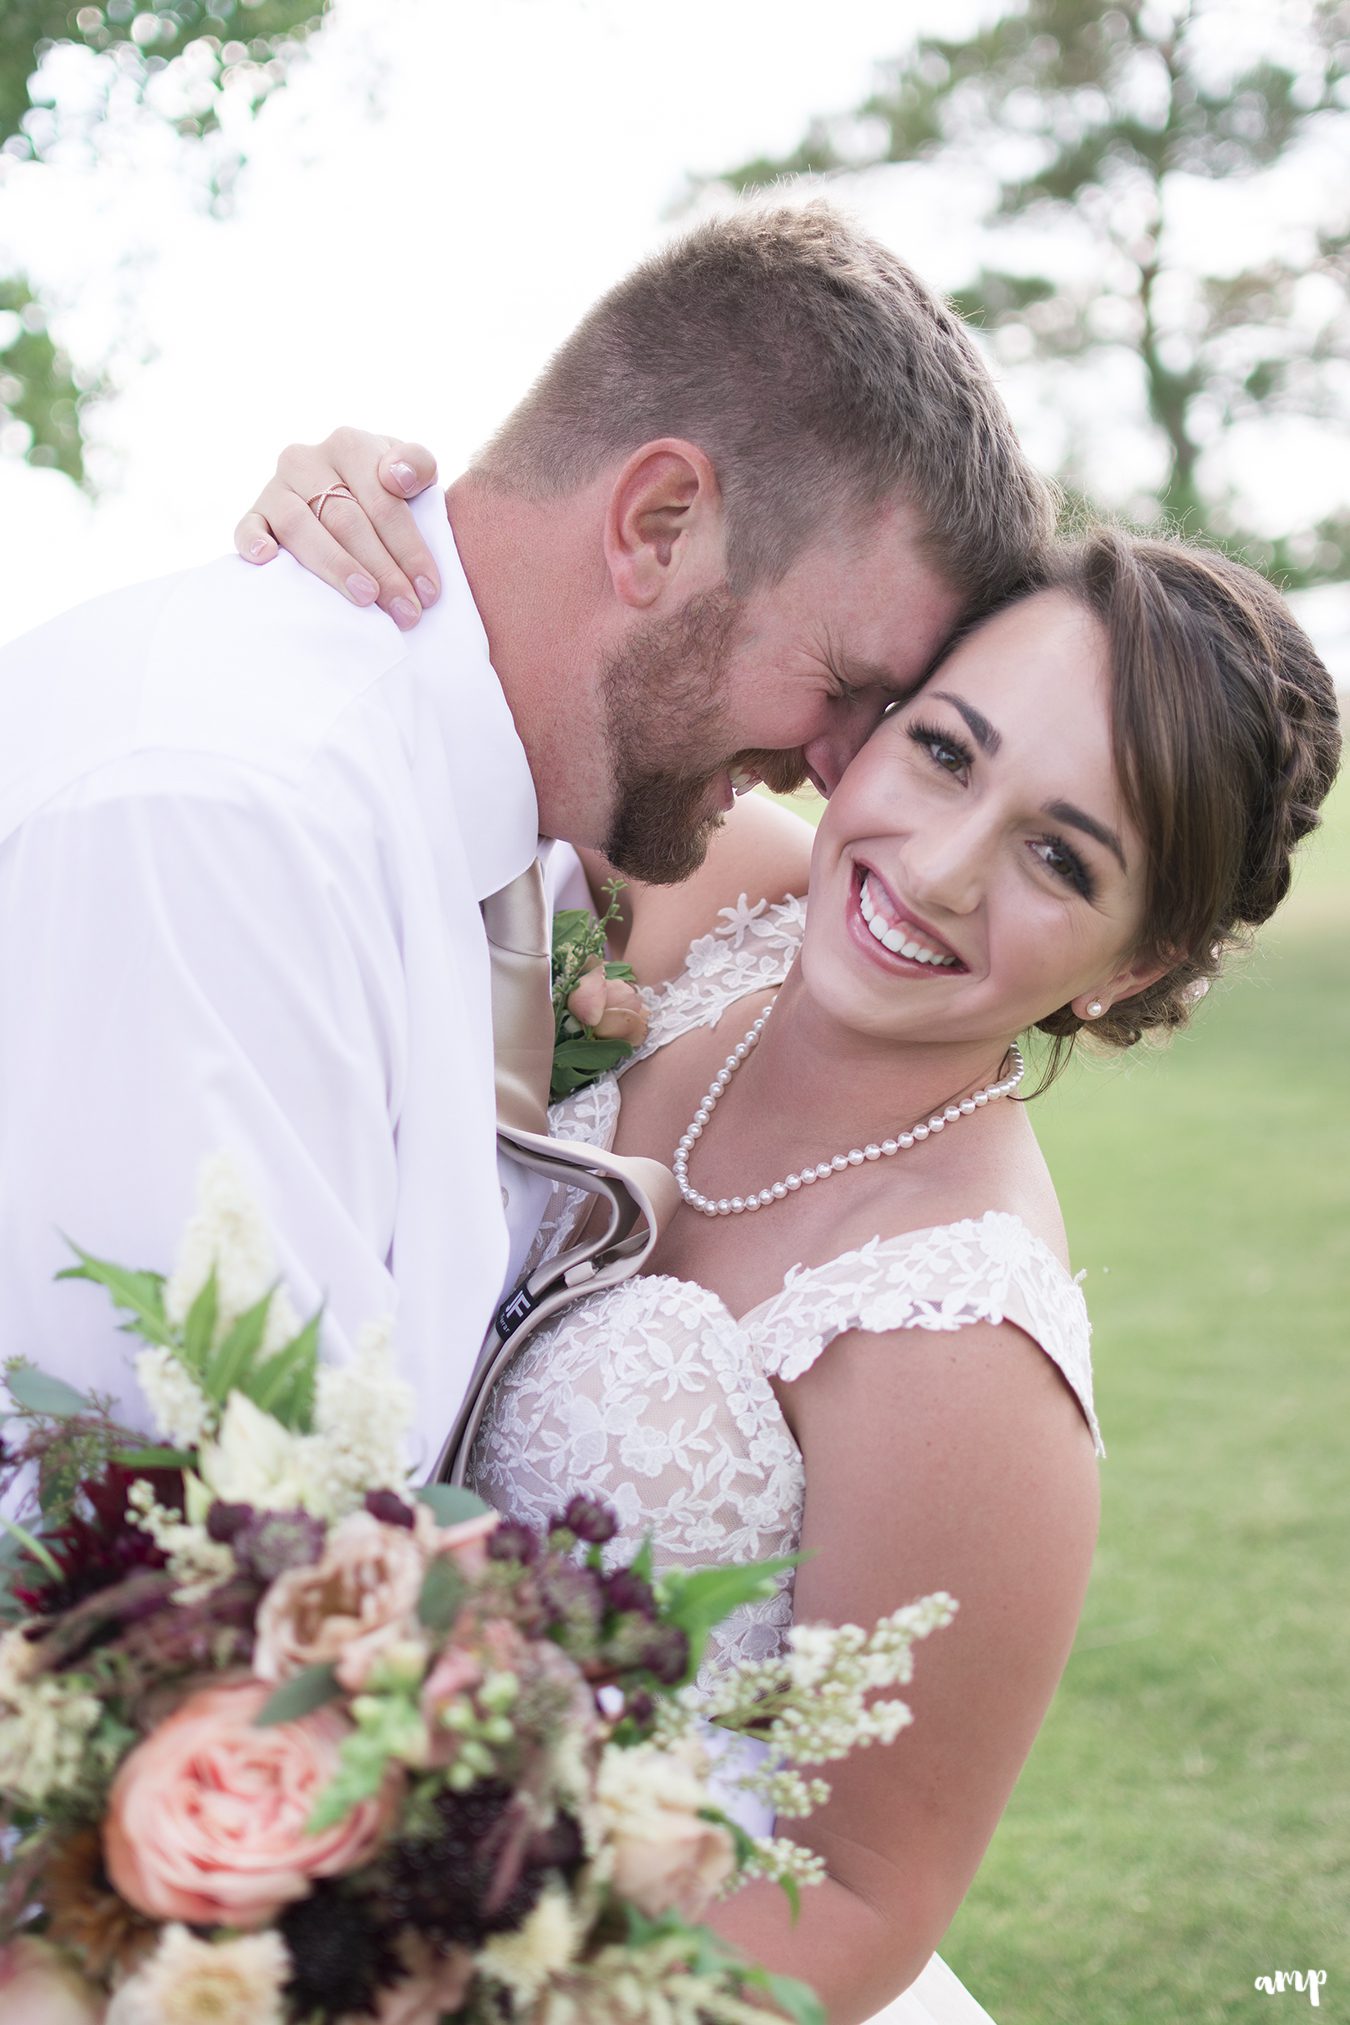 Whimsical vintage flower bouquet and bride with groom laughing